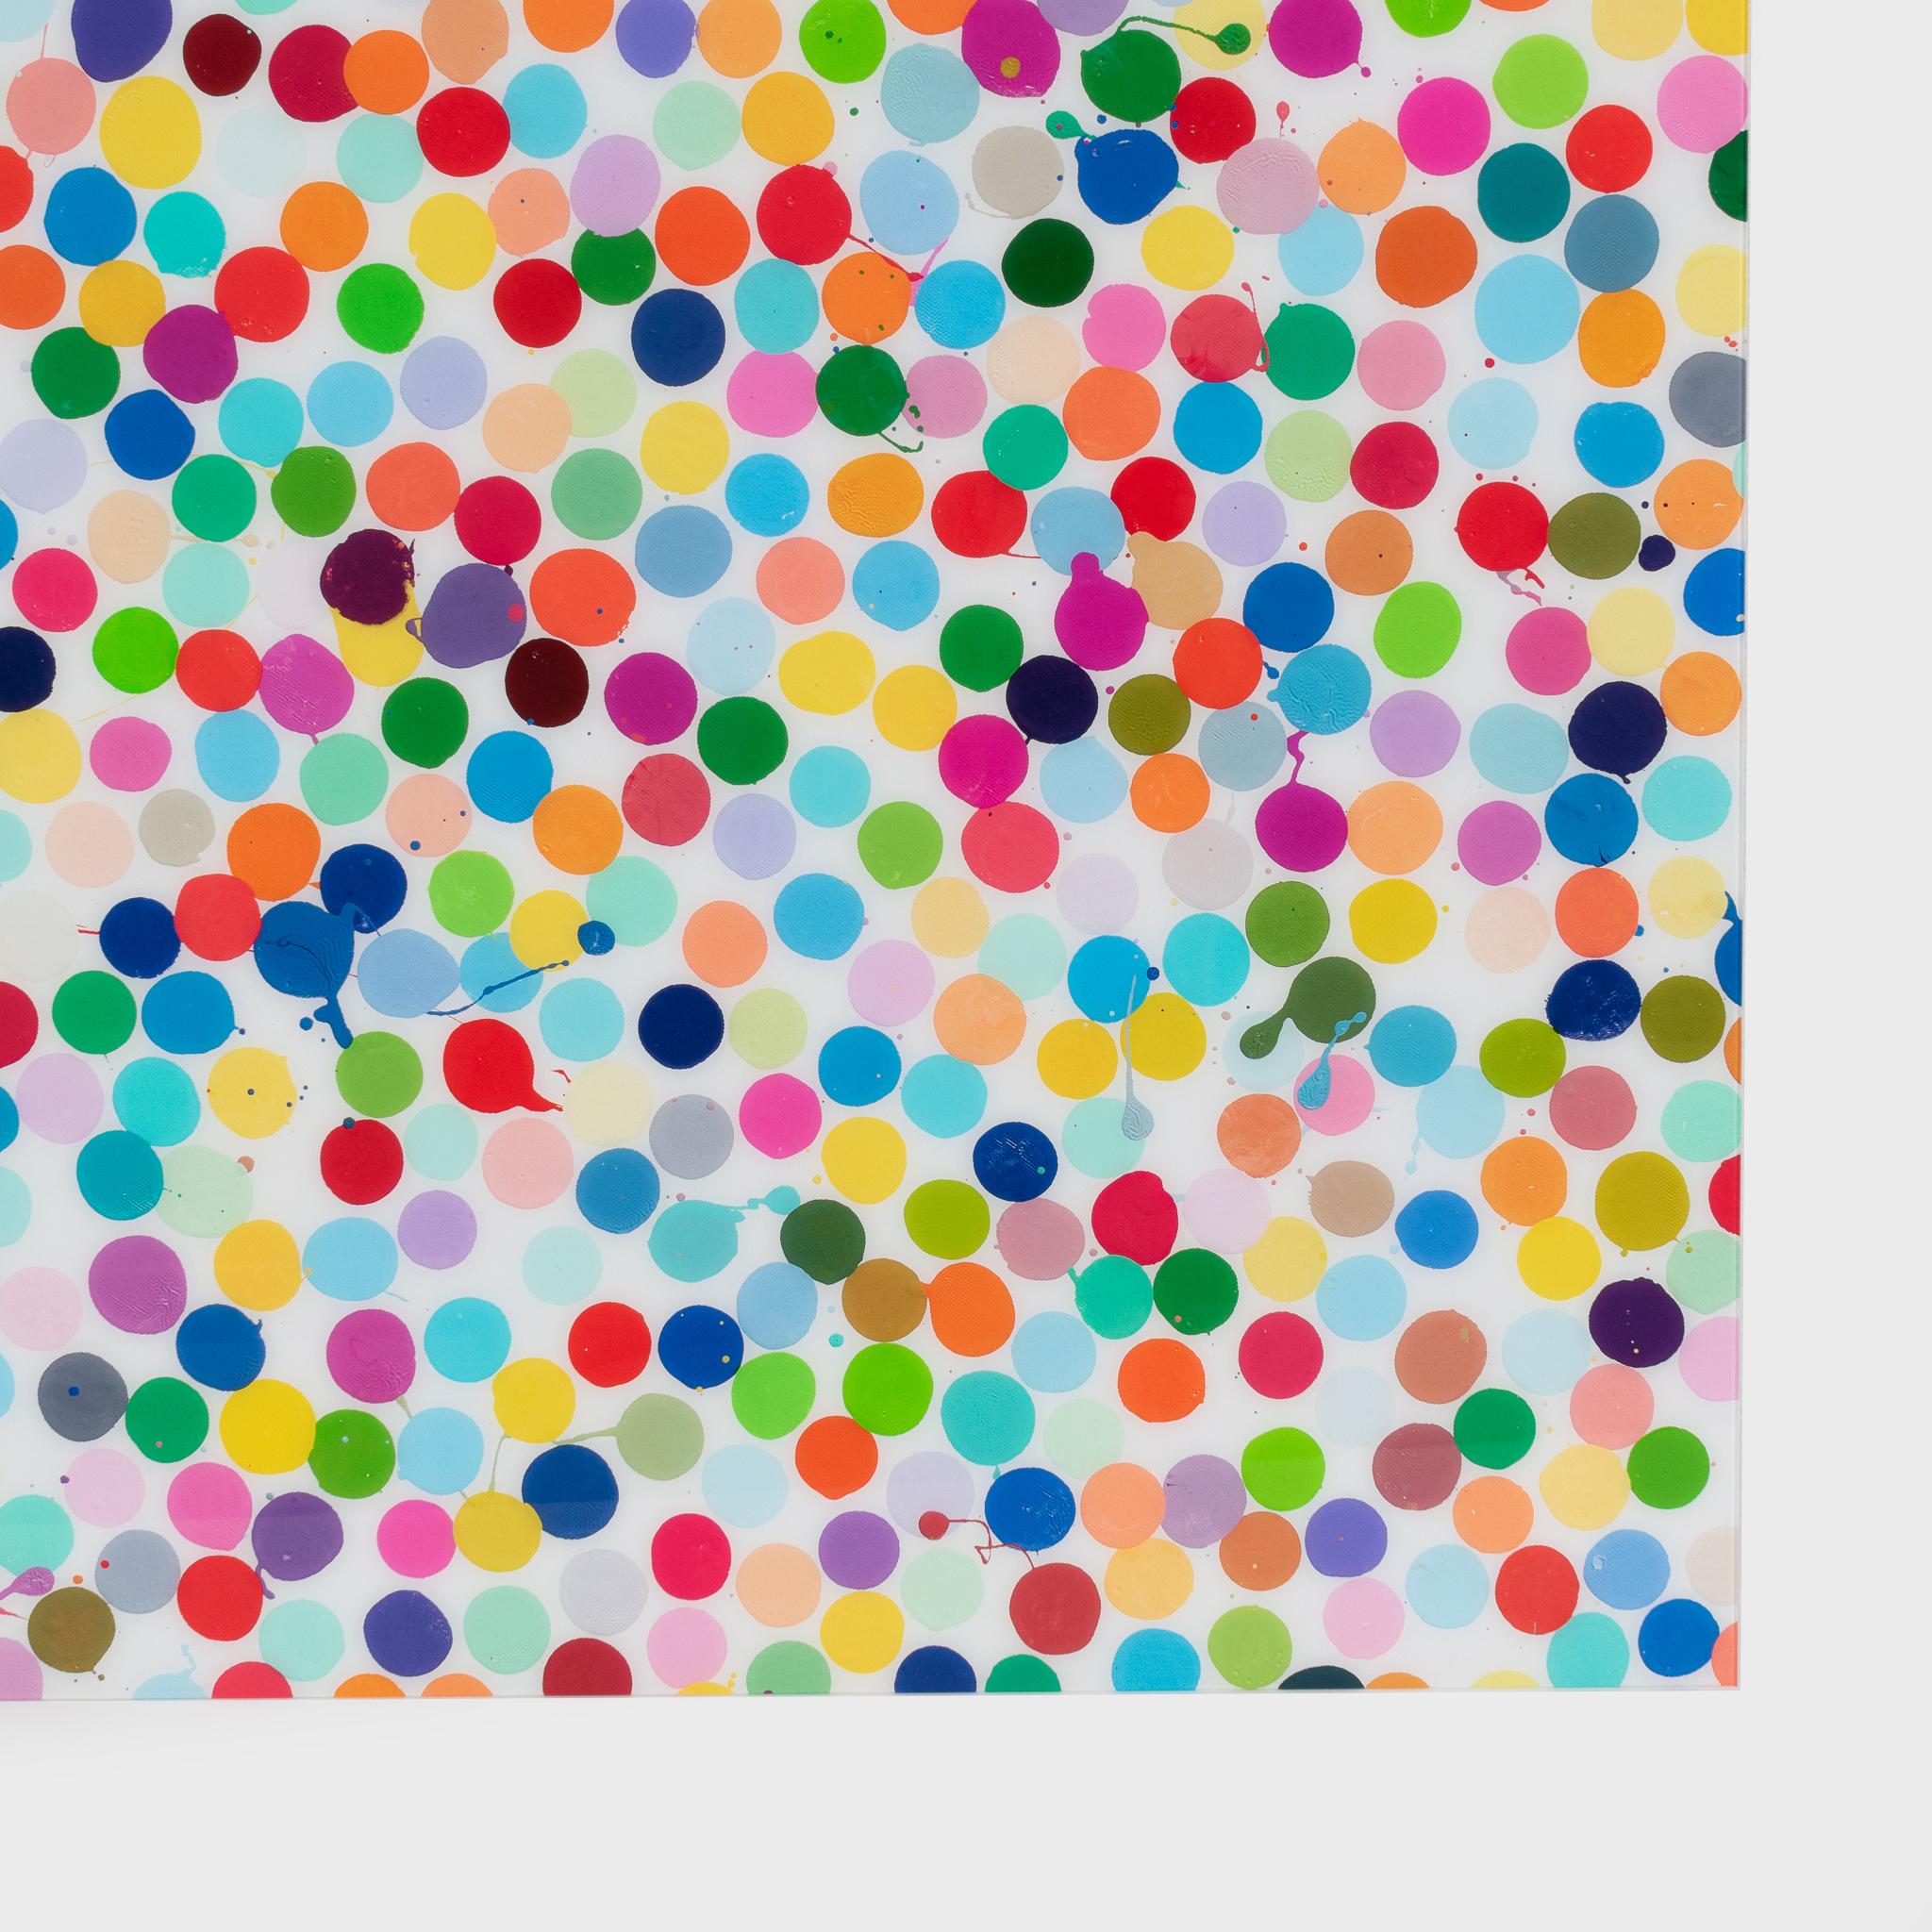 H5-3 Camino Real Damien Hirst Abstract Spot Signed Print For Sale 1